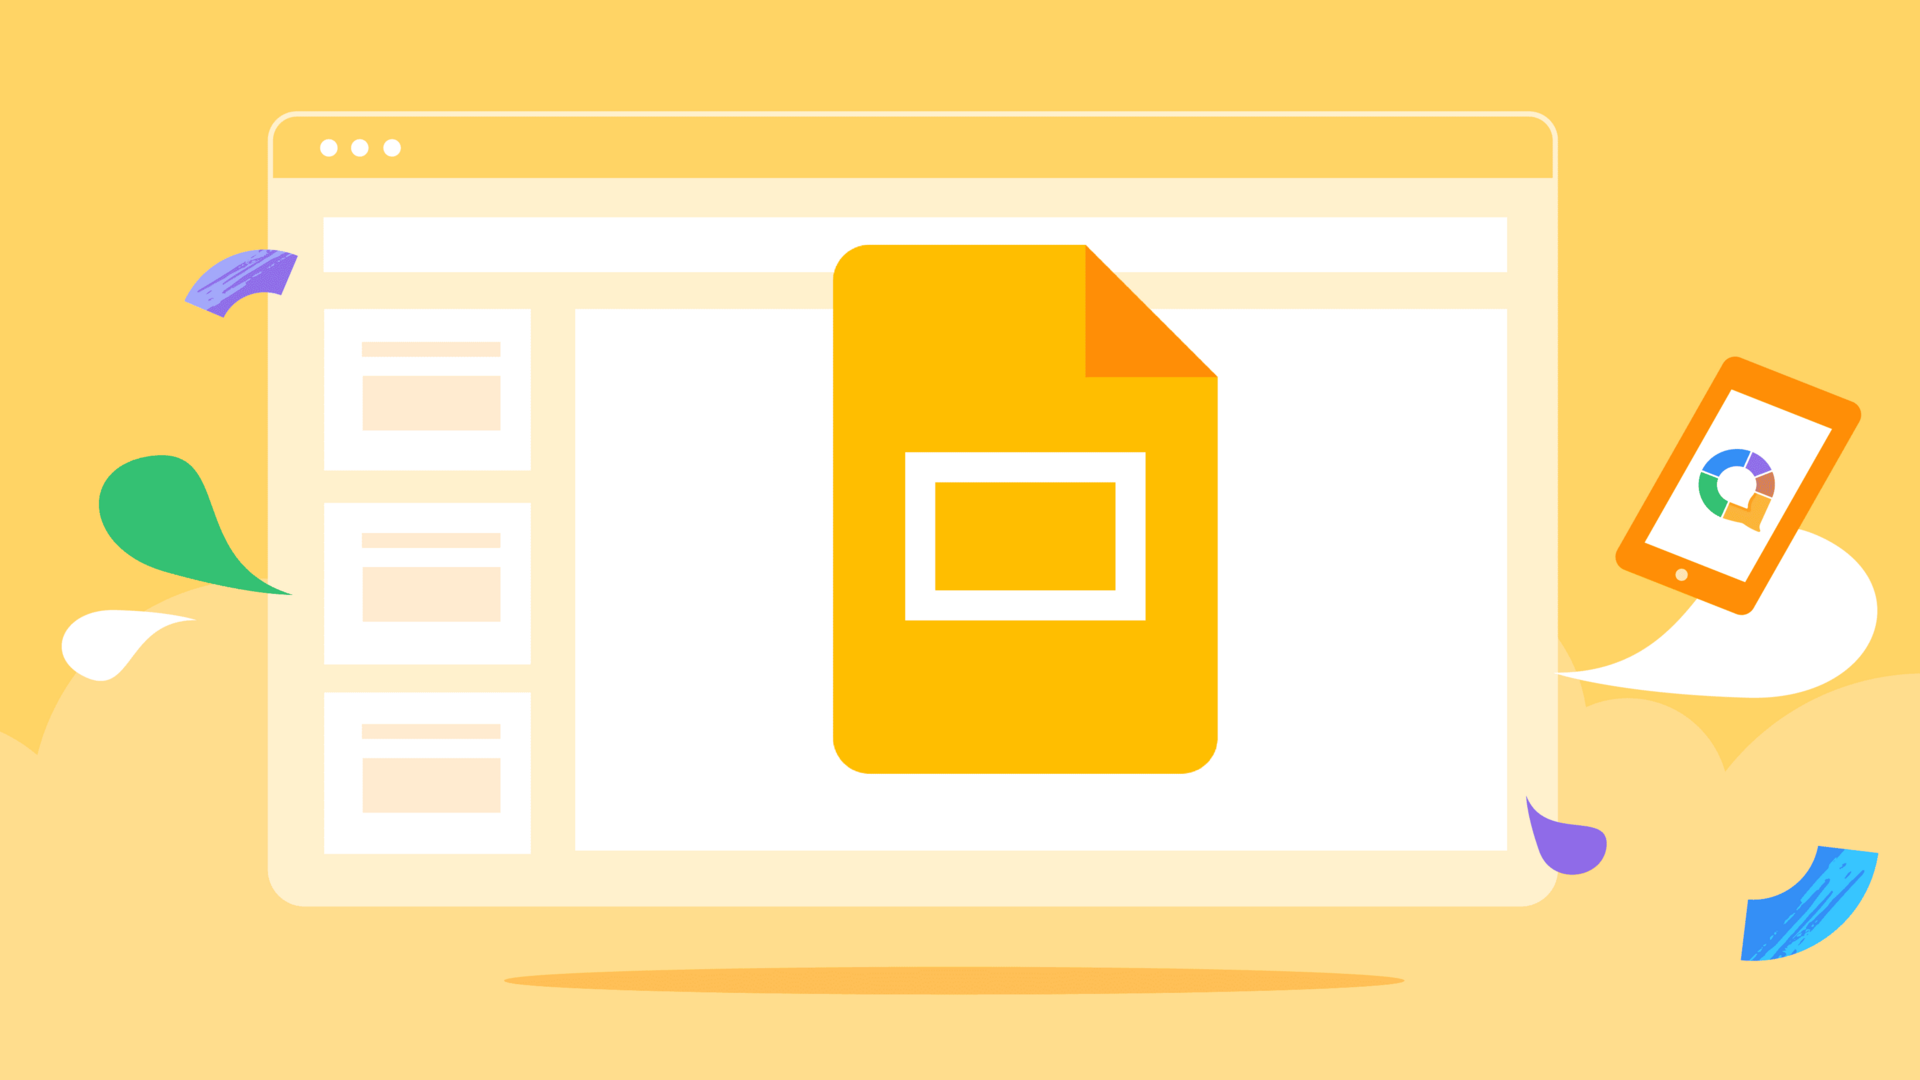 Google Slides introduces live pointer feature: How to enable